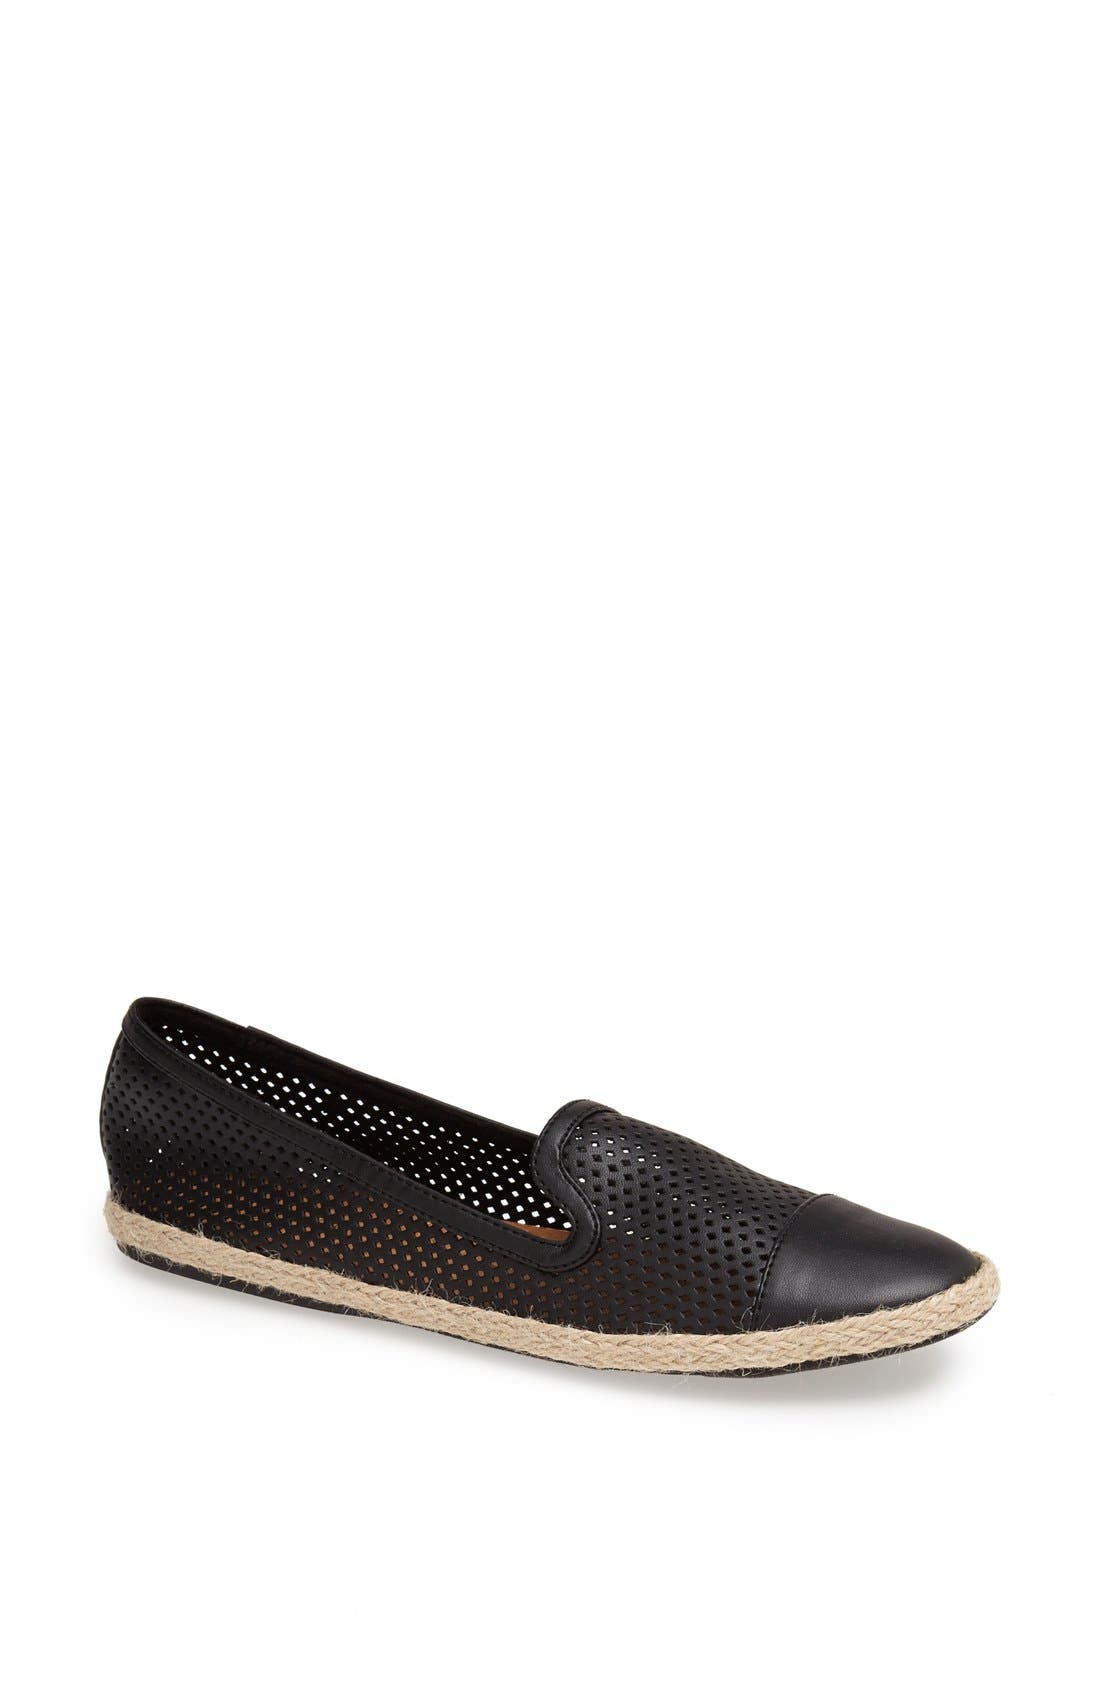 kendall and kylie espadrille flats